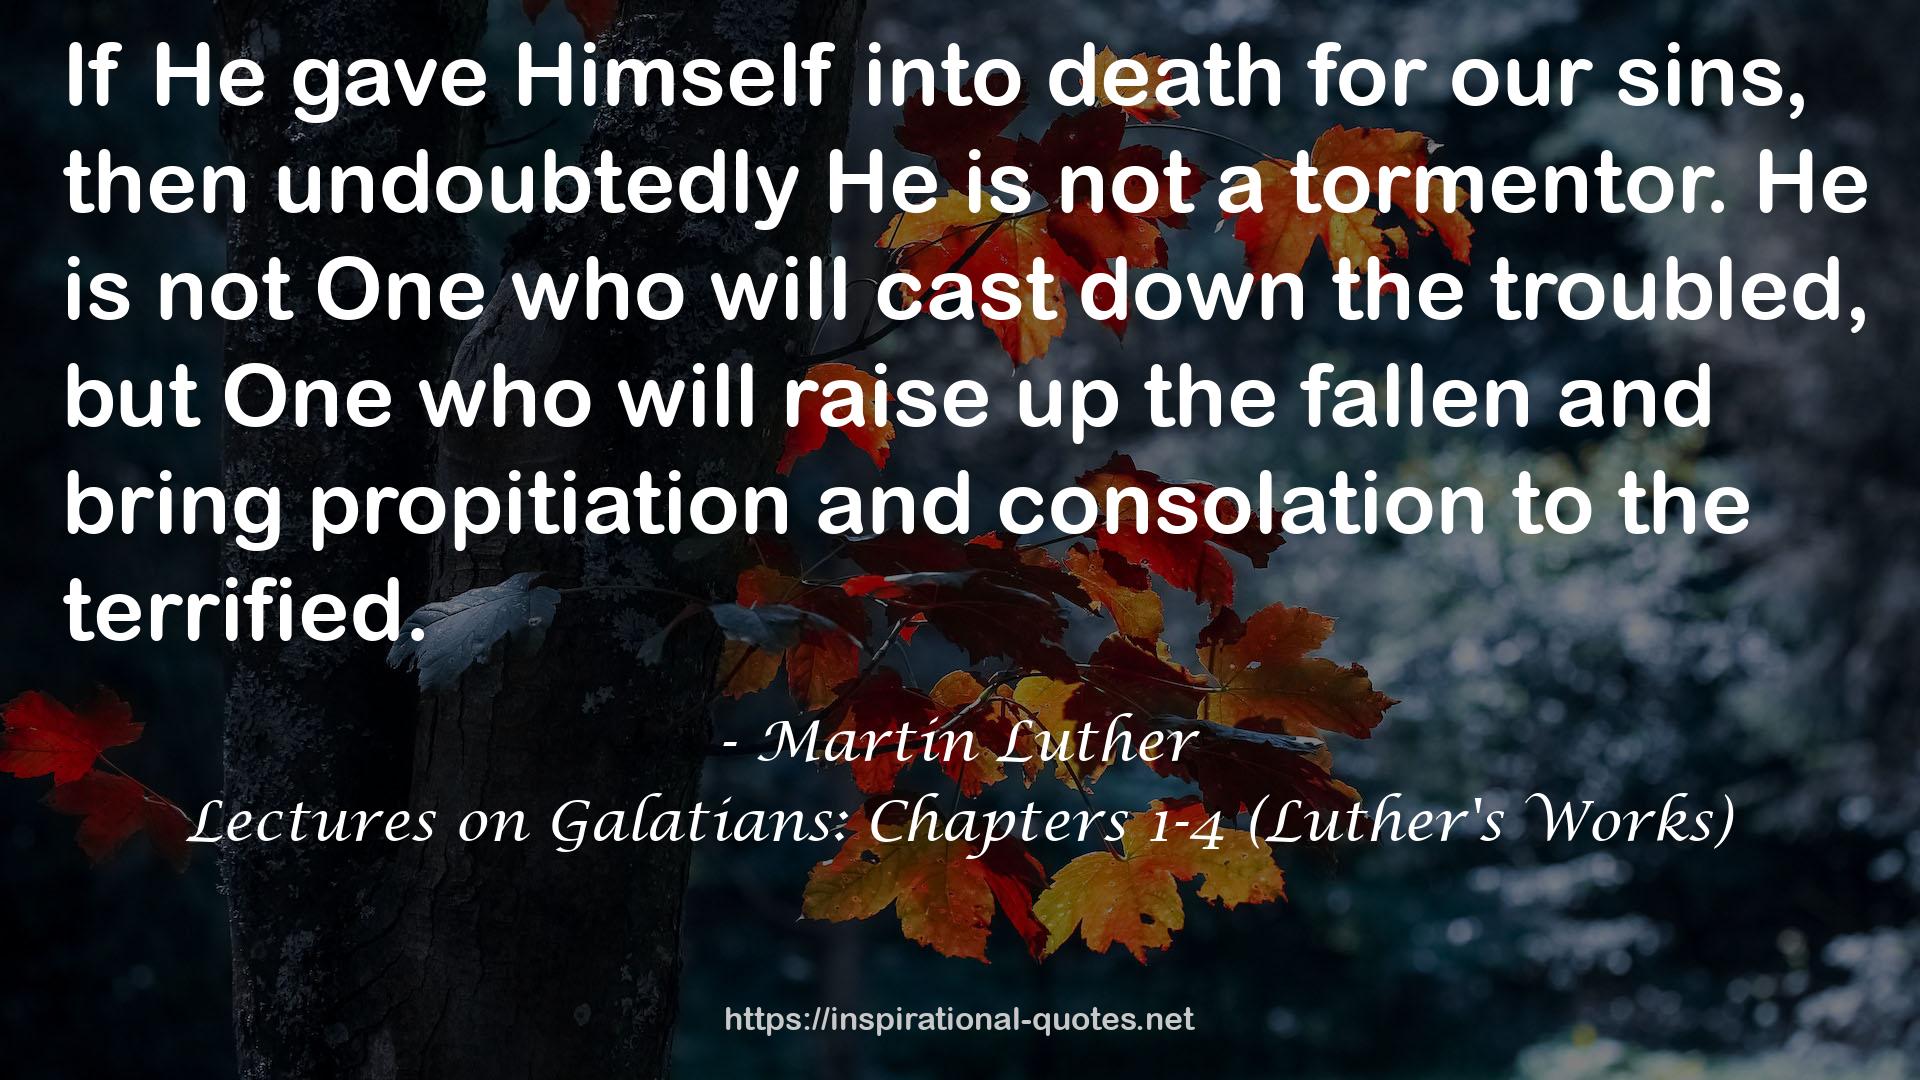 Lectures on Galatians: Chapters 1-4 (Luther's Works) QUOTES